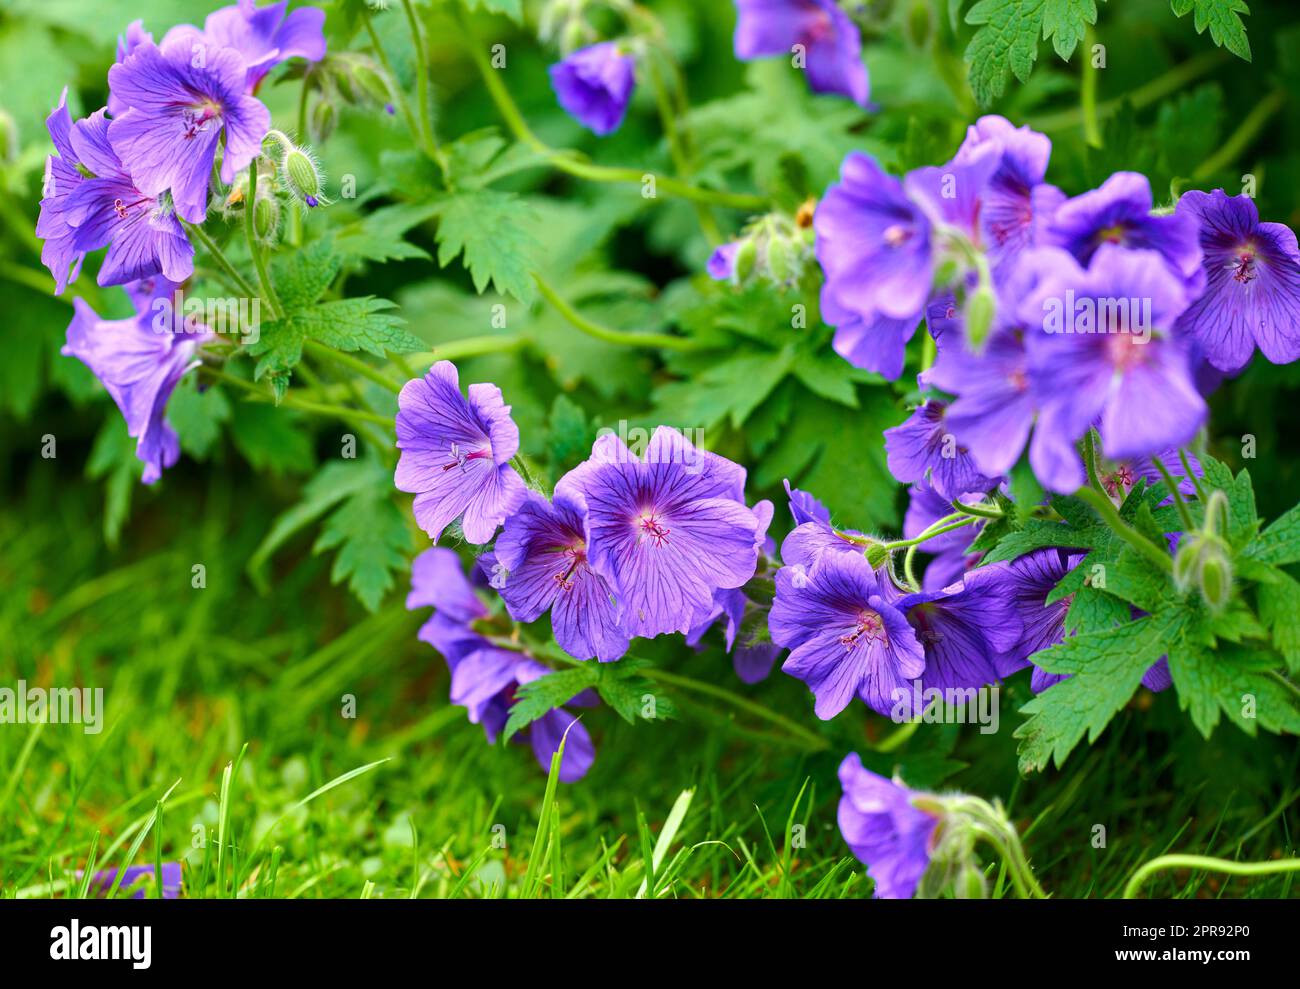 Purple hardy geranium flowers growing outside in a park. Bush of indigo or blue geraniums blooming in a lush garden or backyard in spring. Delicate wild blossoms for nature background with copy space Stock Photo